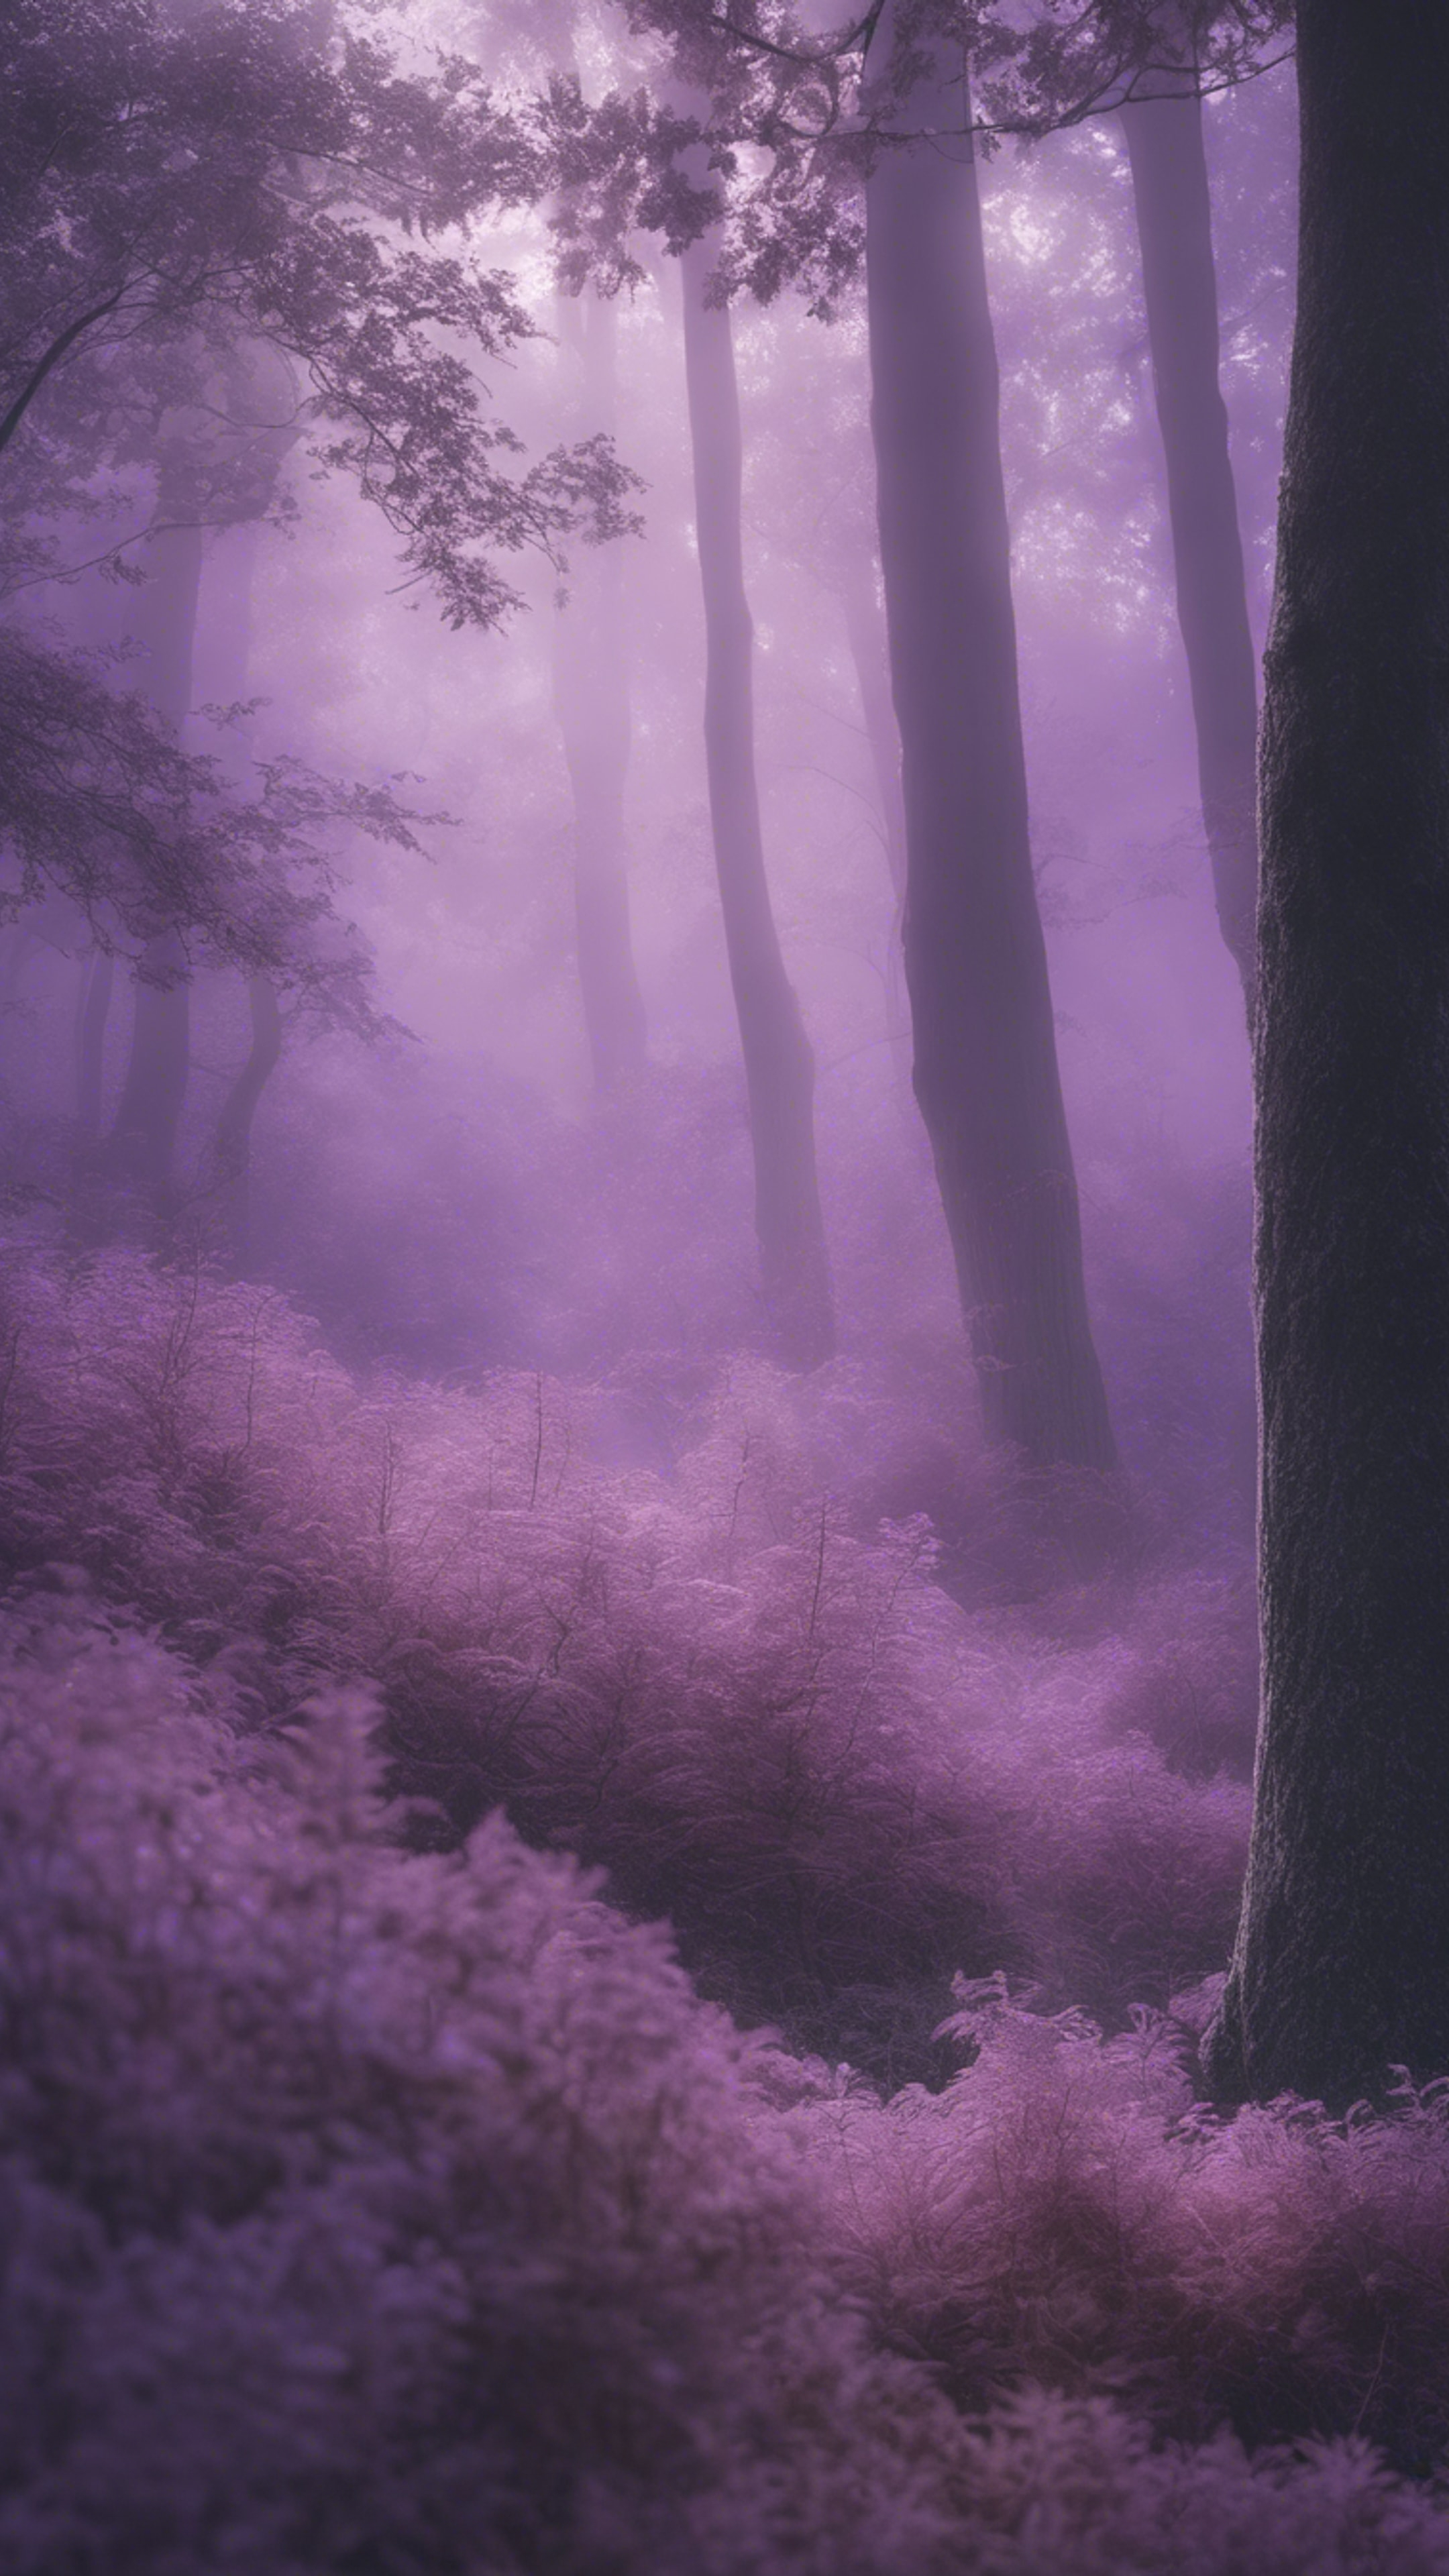 Ethereal scene of a tranquil forest bowed under a silky layer of light purple fog. Sfondo[581b7126aa2a4d368dd8]